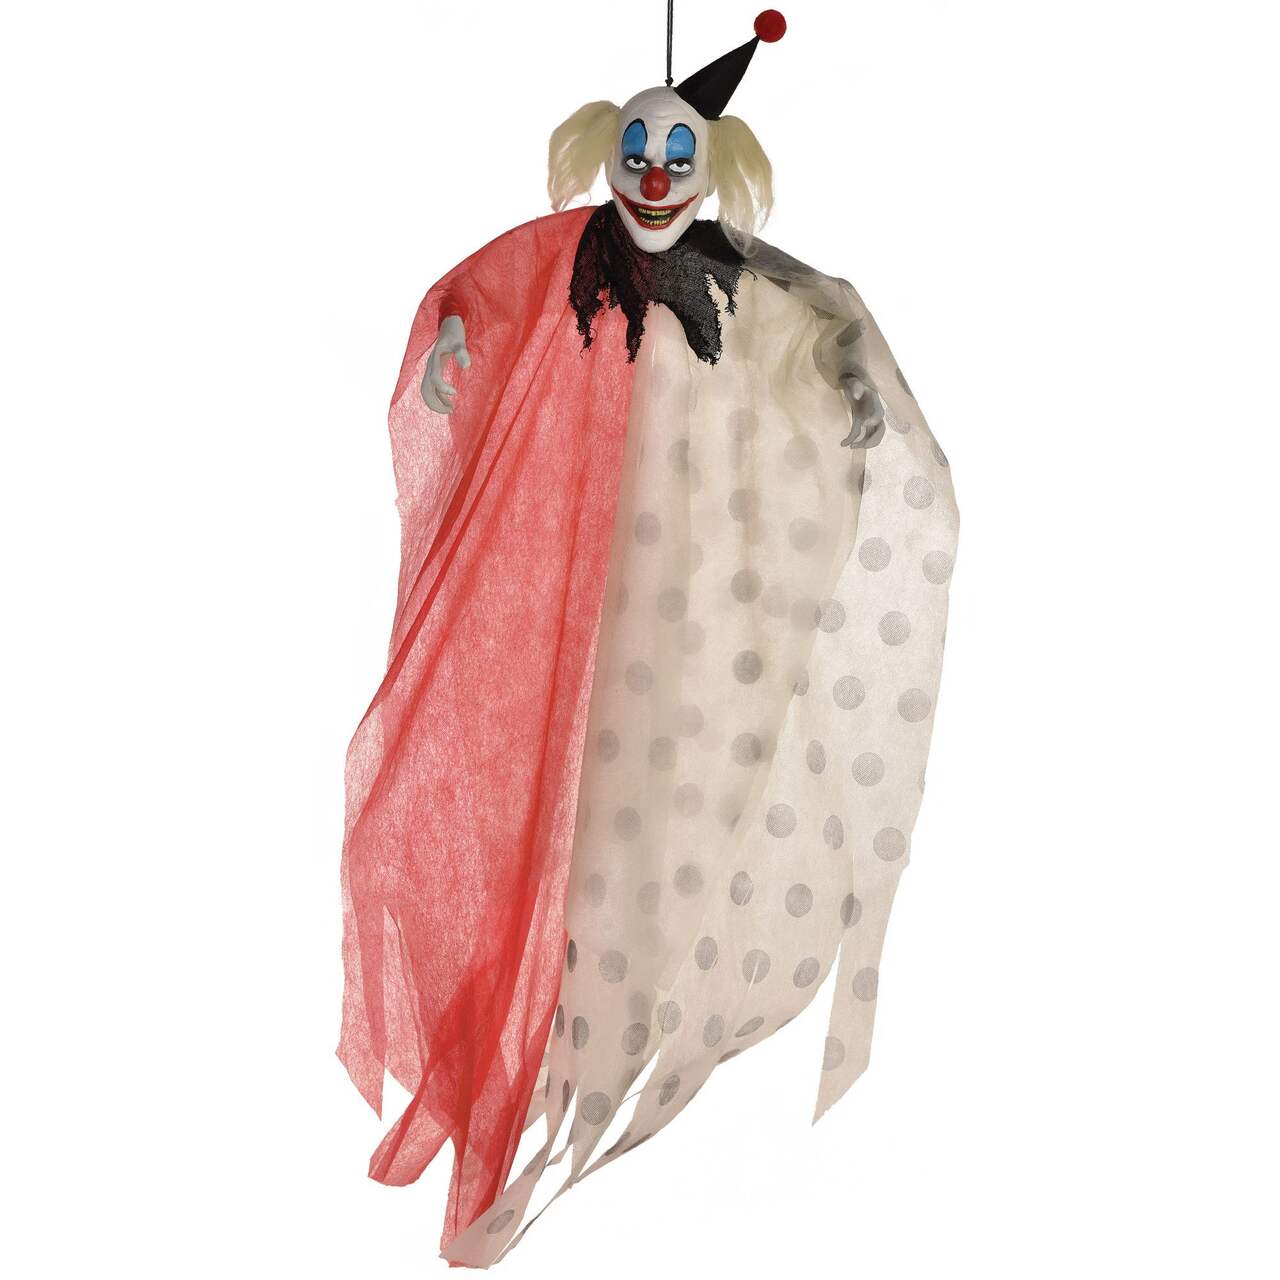 https://media-www.canadiantire.ca/product/seasonal-gardening/party-city-seasonal/party-city-halloween-and-fall-decor/8550317/48-hanging-clown-abd1a6a9-f712-44b8-9475-9056e3c2e9be-jpgrendition.jpg?imdensity=1&imwidth=640&impolicy=mZoom